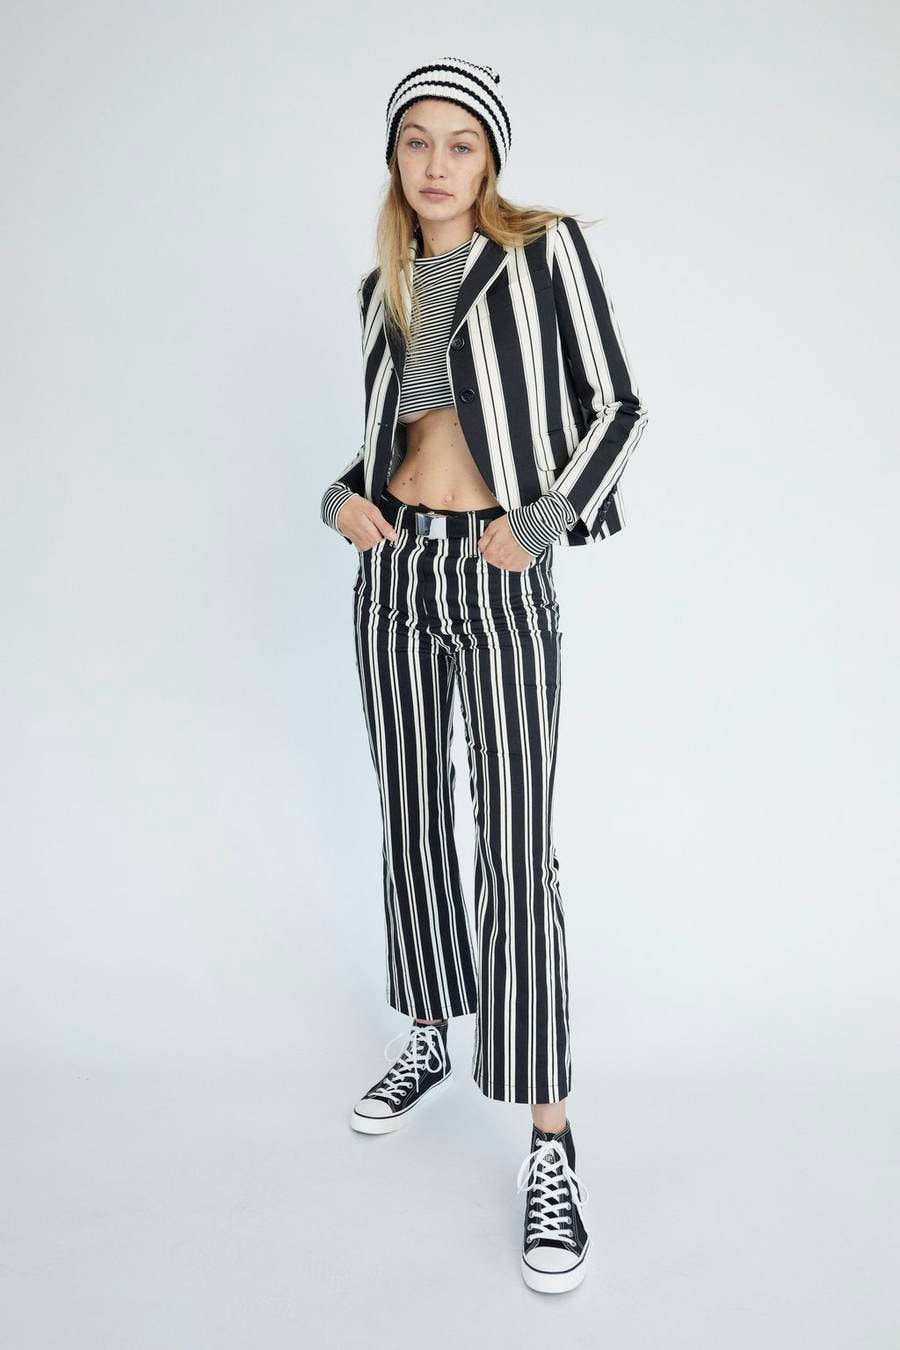 Marc Jacobs Resort 2019 Redux Collection Striped Long-Sleeve Crop Top High-Waisted Pant Uneven Knit Beanie Black White